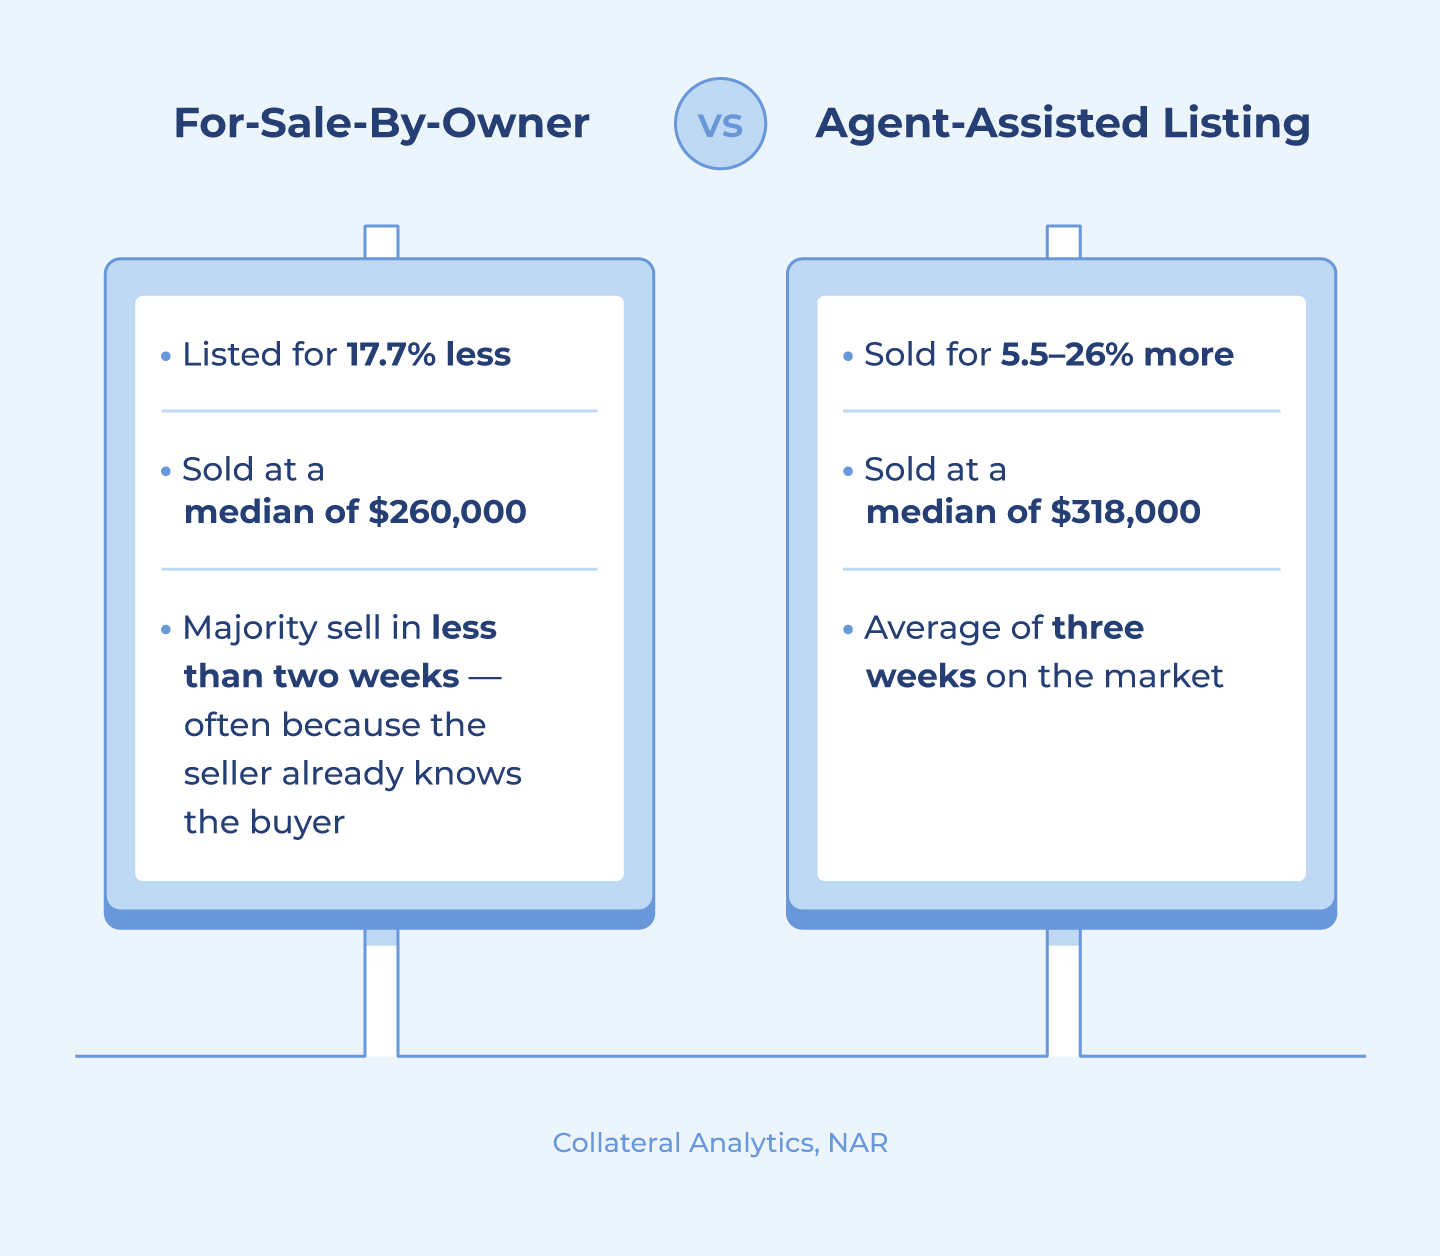 FSBO homes (median $260,000) are listed for 17.7% less and often sell in two weeks or less, usually because the seller already knows the buyer. Agent-assisted listings (median $318,000) sell for 5.5-26% more and spend an average of three weeks on the market.